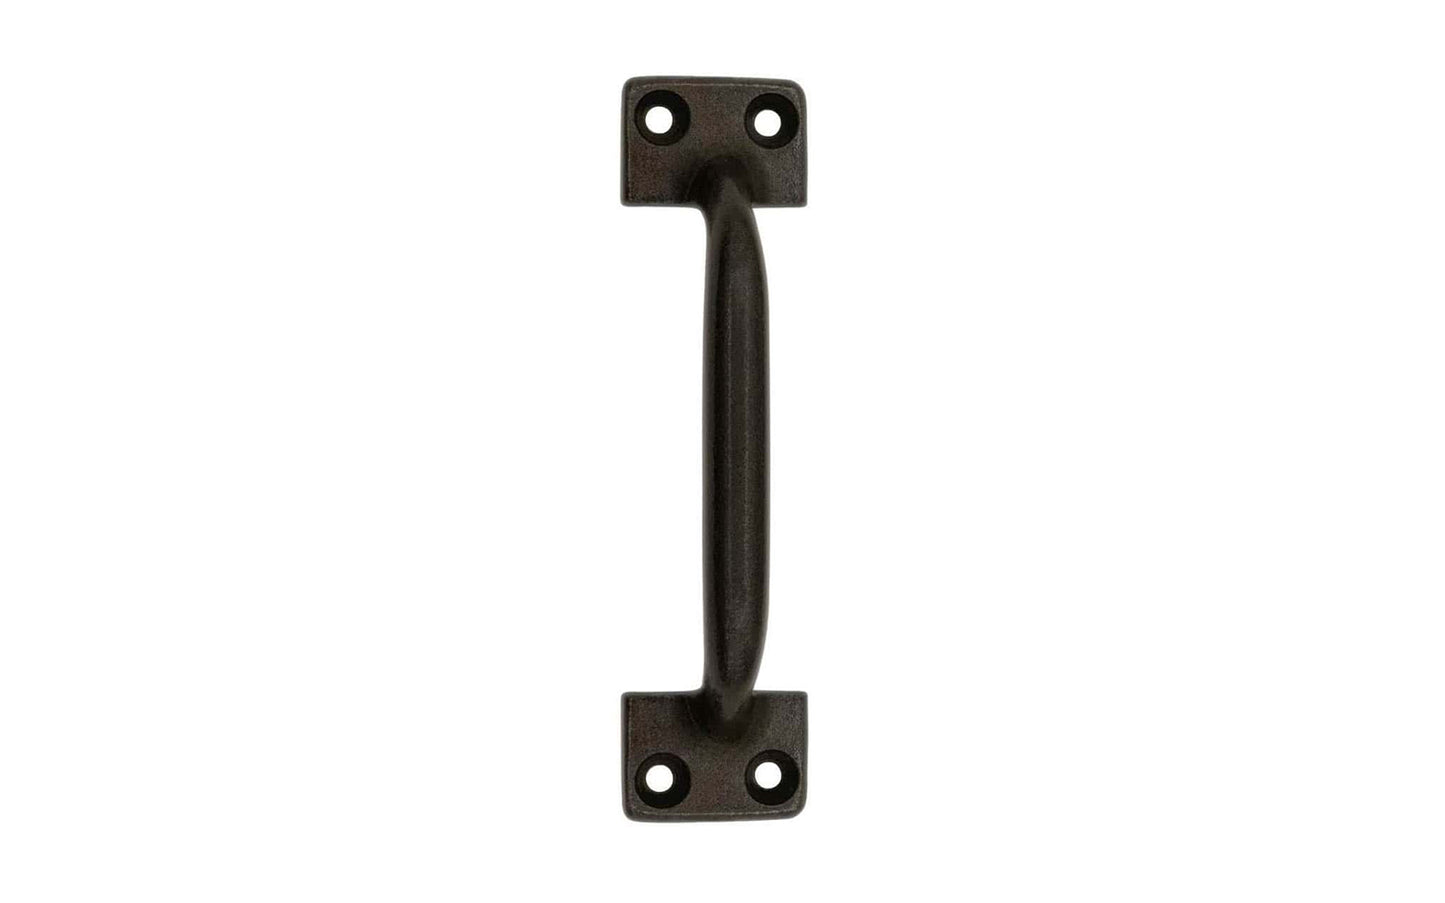 A Classic Cast Iron Handle ~ 3-9/16" On Centers with a satin black finish. Excellent for a variety of uses including drawers, cabinets, smaller doors, sashes, furniture, & screen doors. A classic looking handle excellent for adding charm & style to your home. Rustic-looking black finish with lacquer to resist rust.